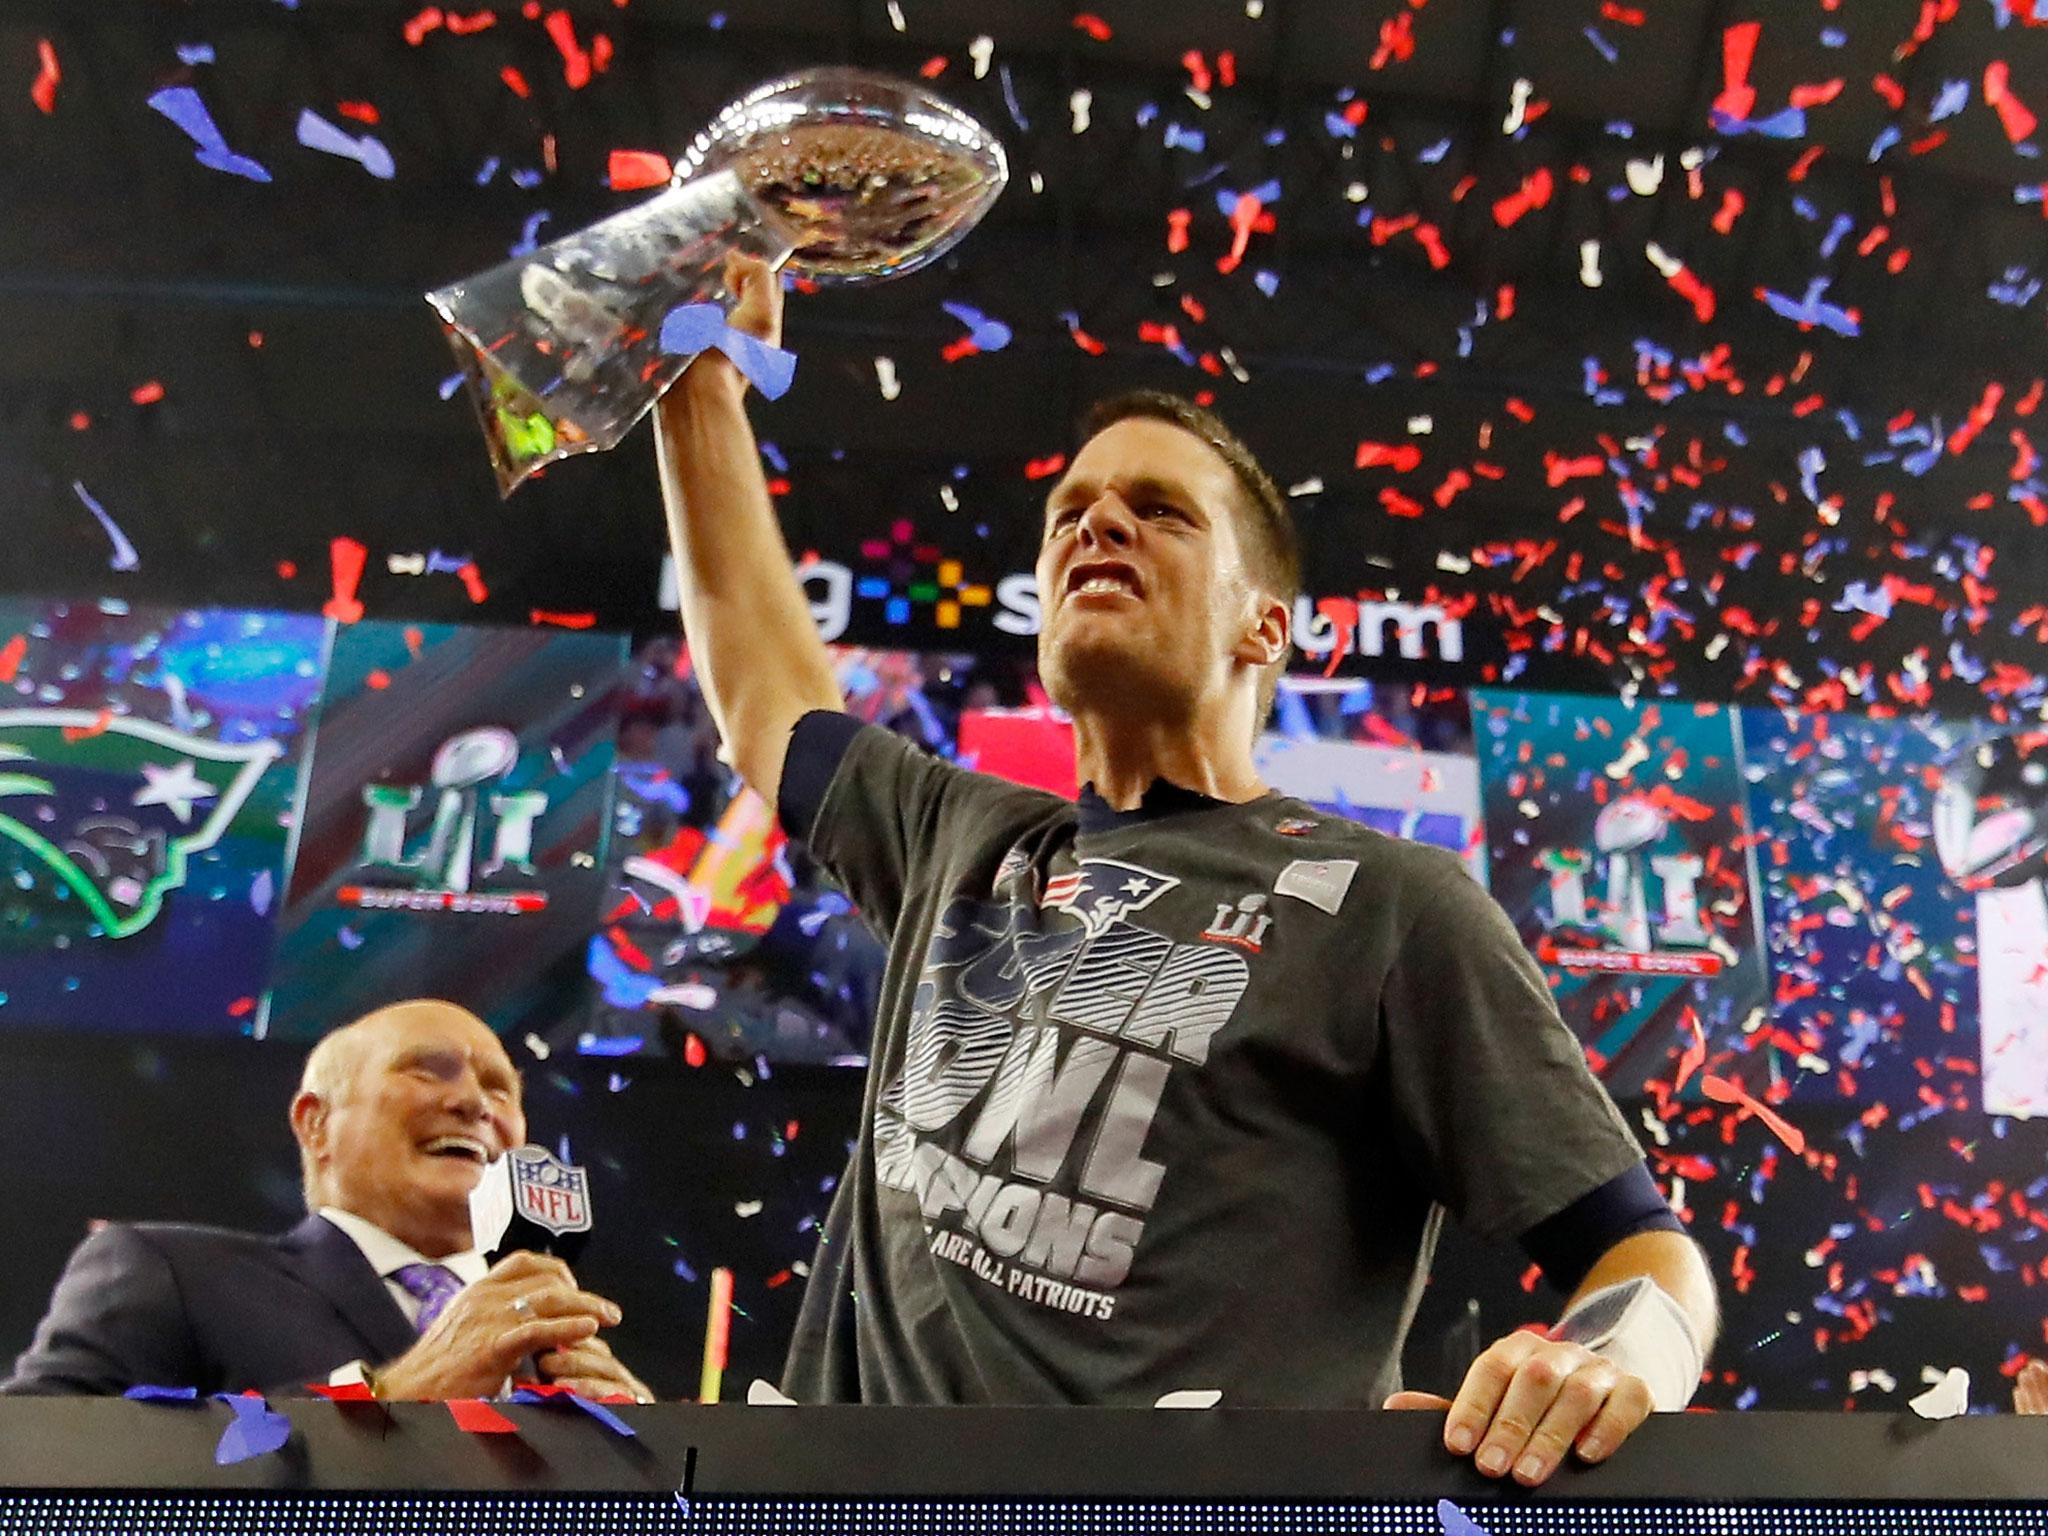 Tom Brady lifts the Lombardi Trophy after the New England Patriots won the Super Bowl by defeating Atlanta Falcons